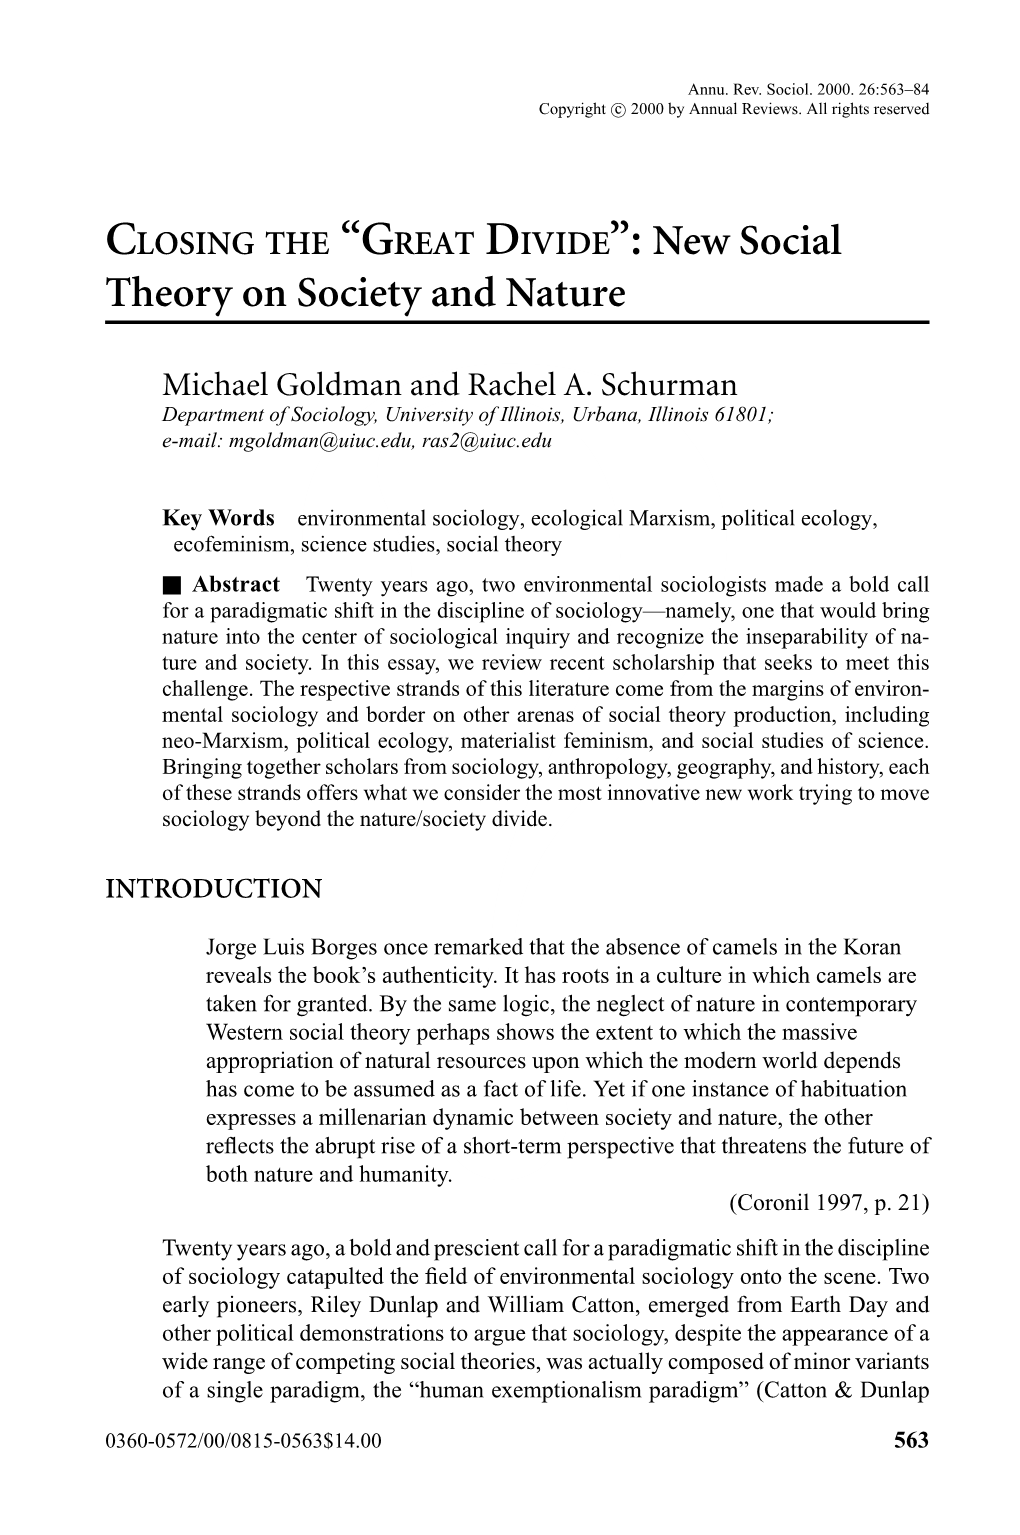 Theory on Society and Nature